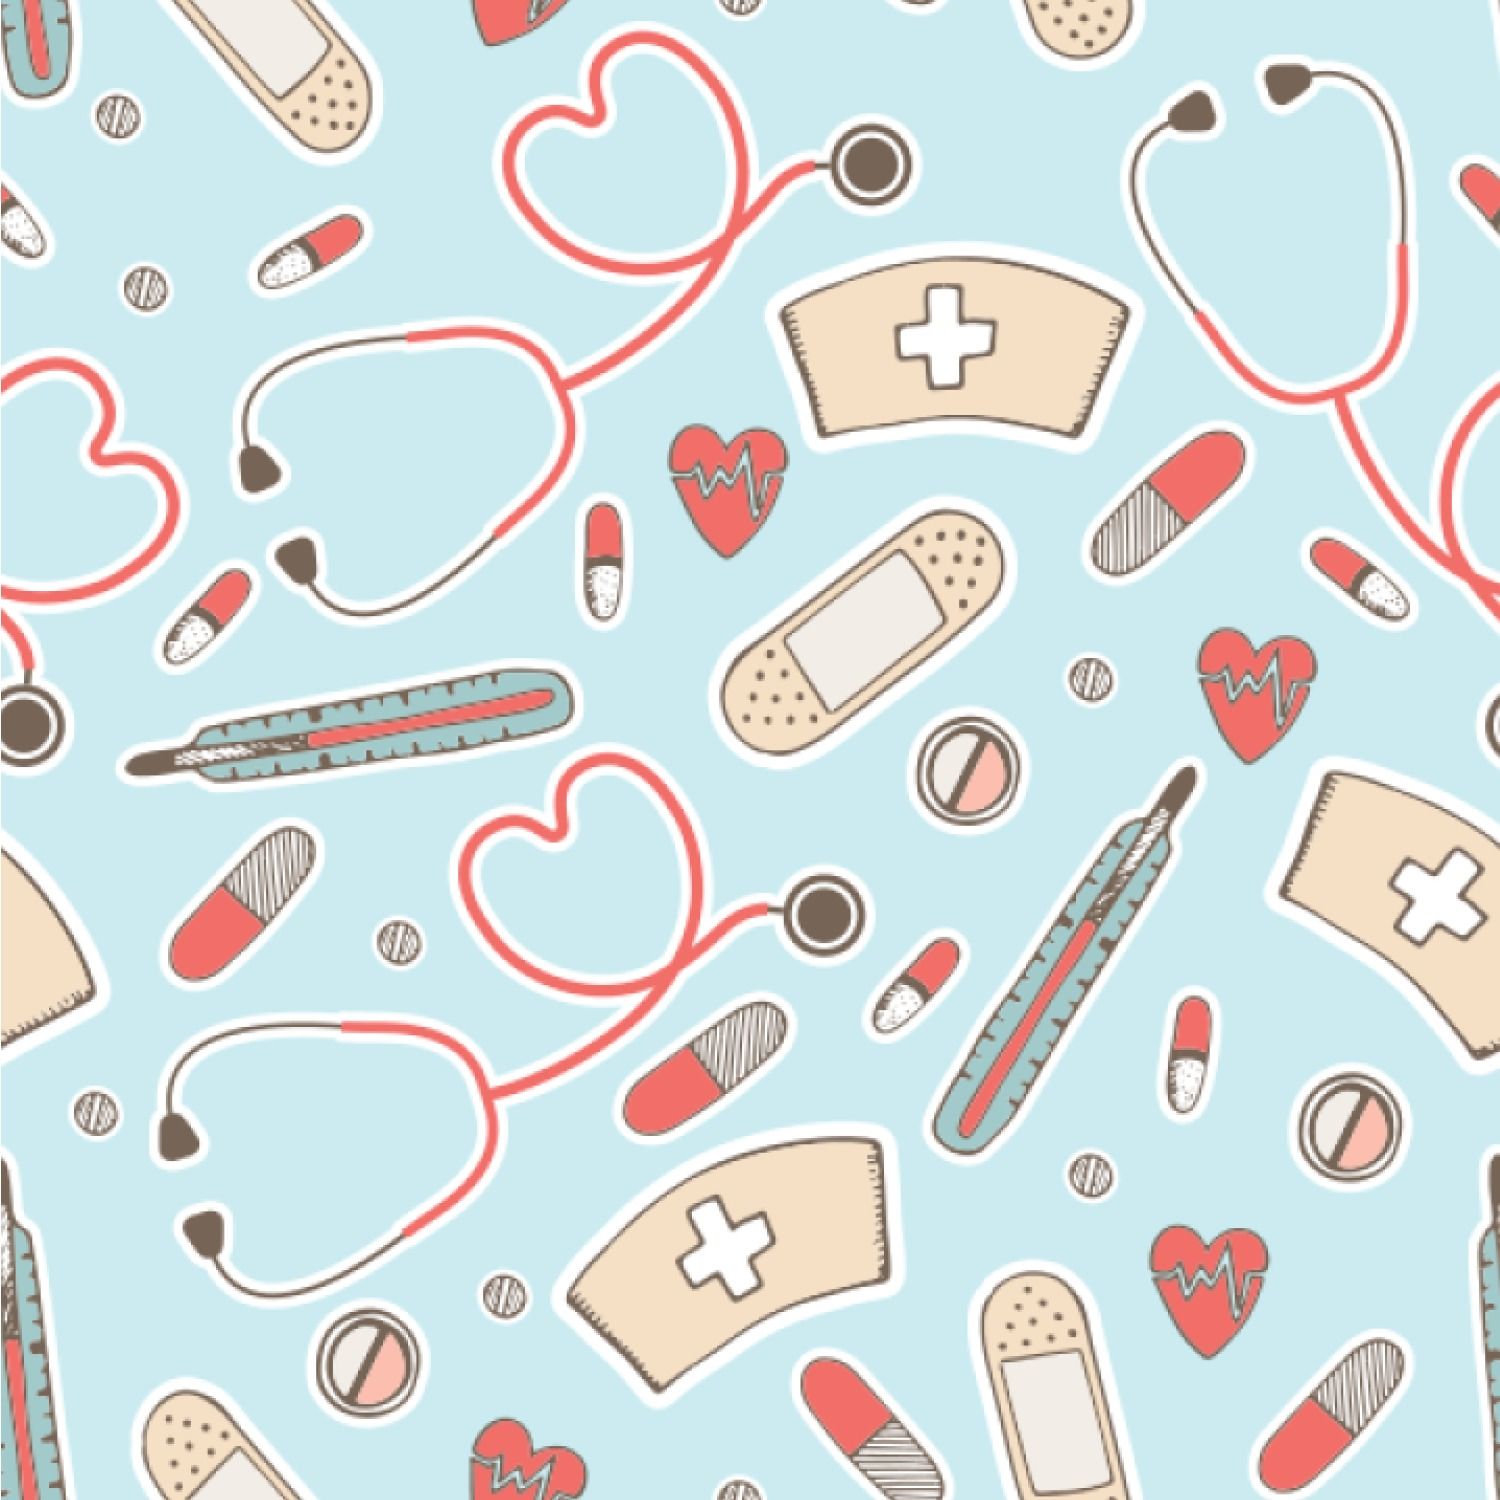 Seamless pattern with medical icons and hearts - Nurse